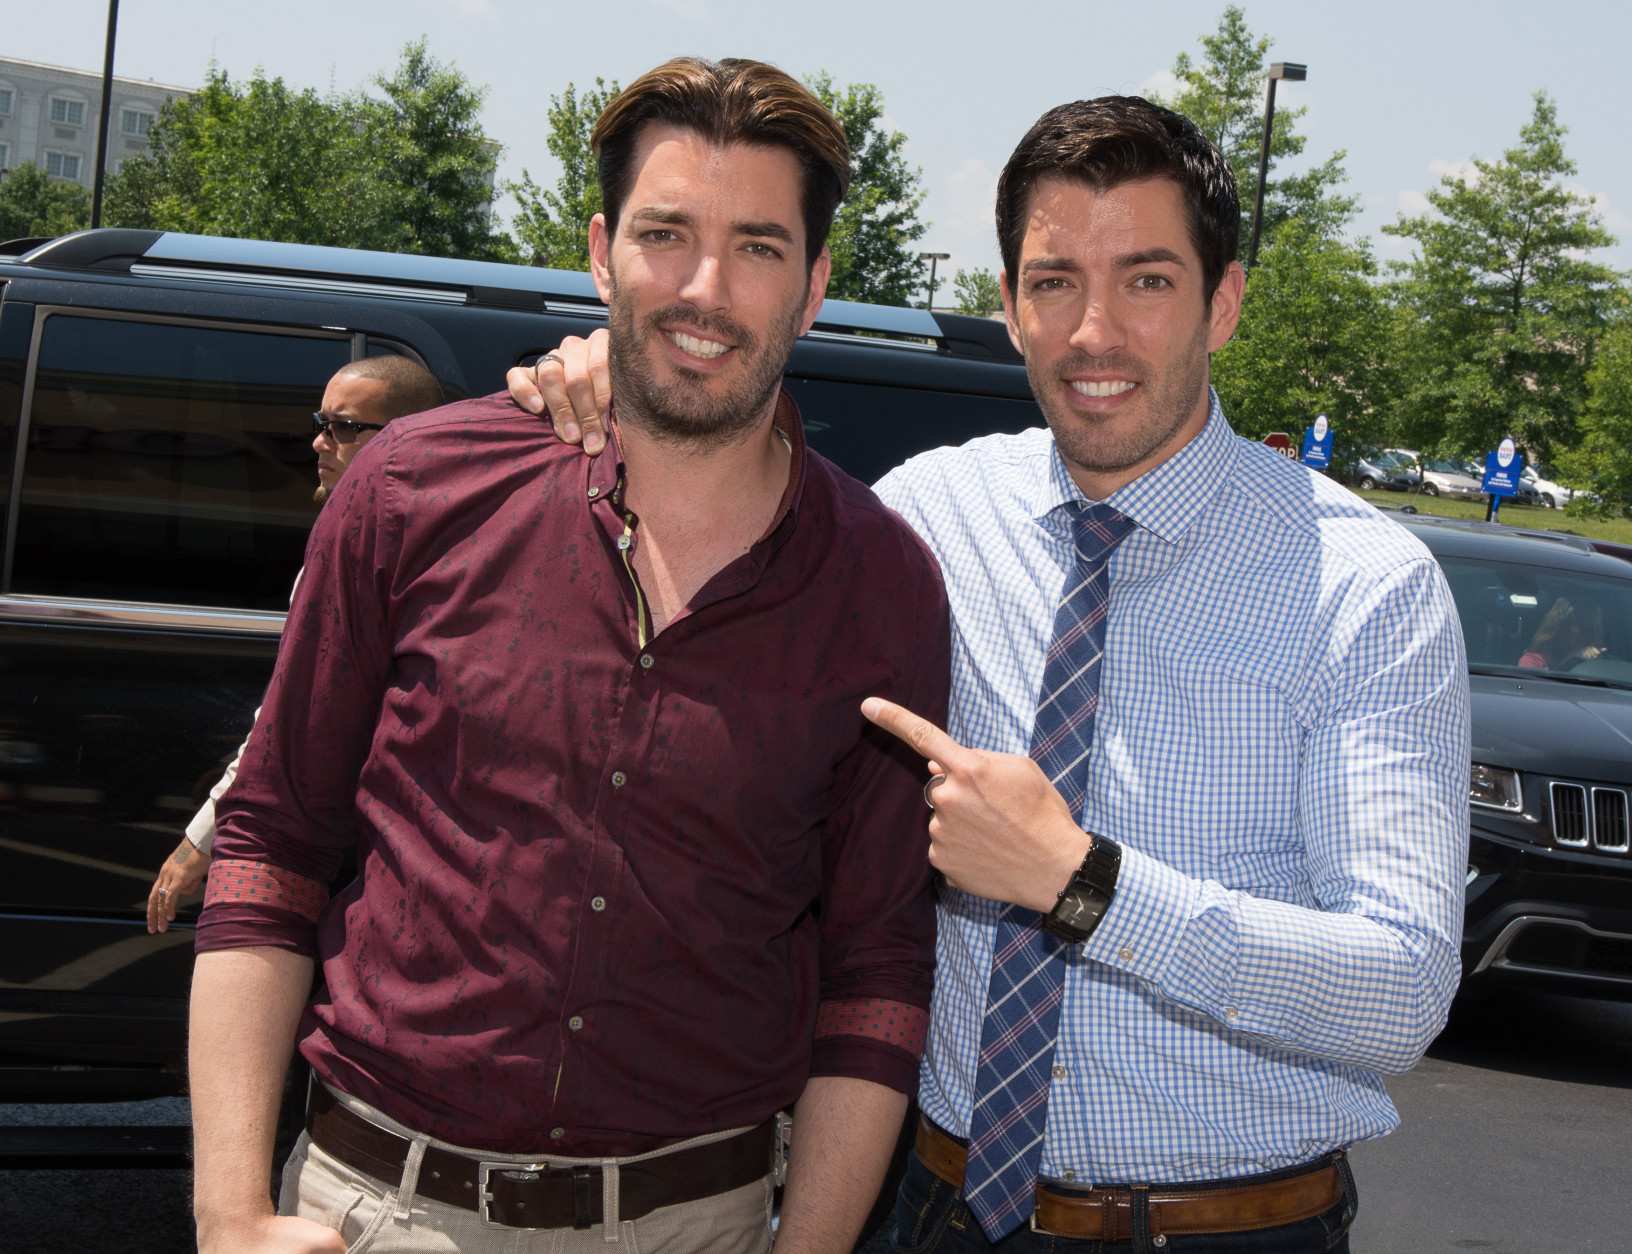 LIVINGSTON, NJ - JULY 12:  Cost Plus World Market and Jonathan &amp; Drew Scott, hosts of Property Brothers, Celebrate the Grand Opening of its New Livingston, NJ Store on July 12, 2014 in Livingston, New Jersey.  (Photo by Dave Kotinsky/Getty Images for Cost Plus World Market)